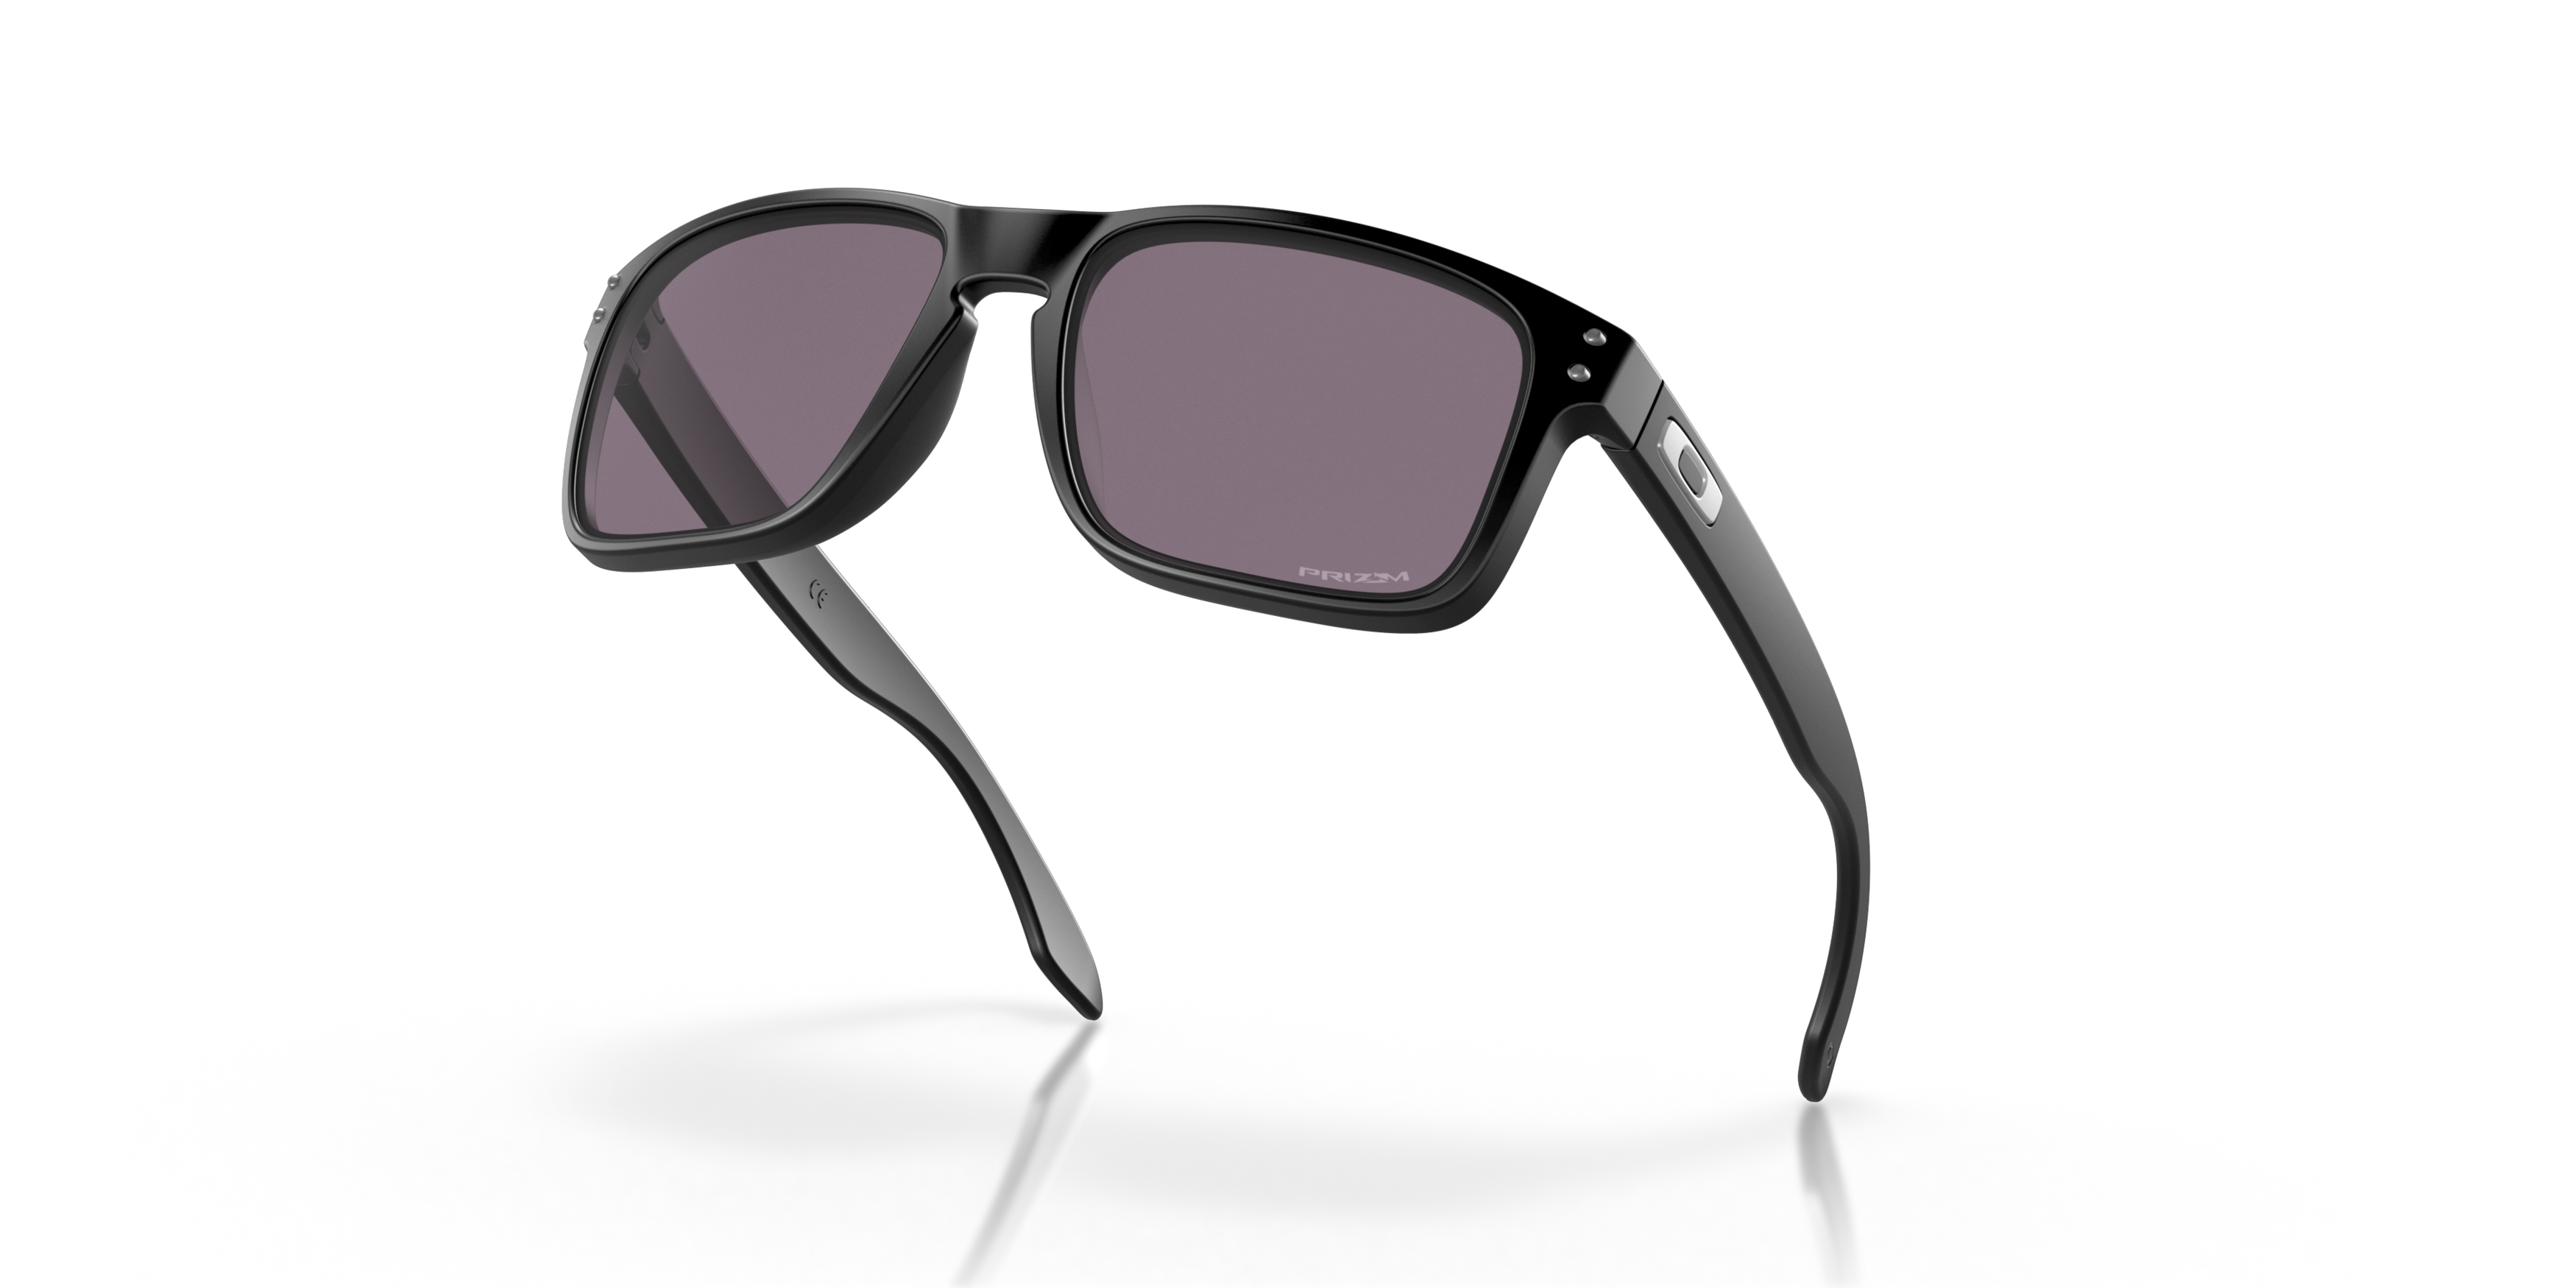 [products.image.bottom_up] Oakley 0OO9102 910000000000